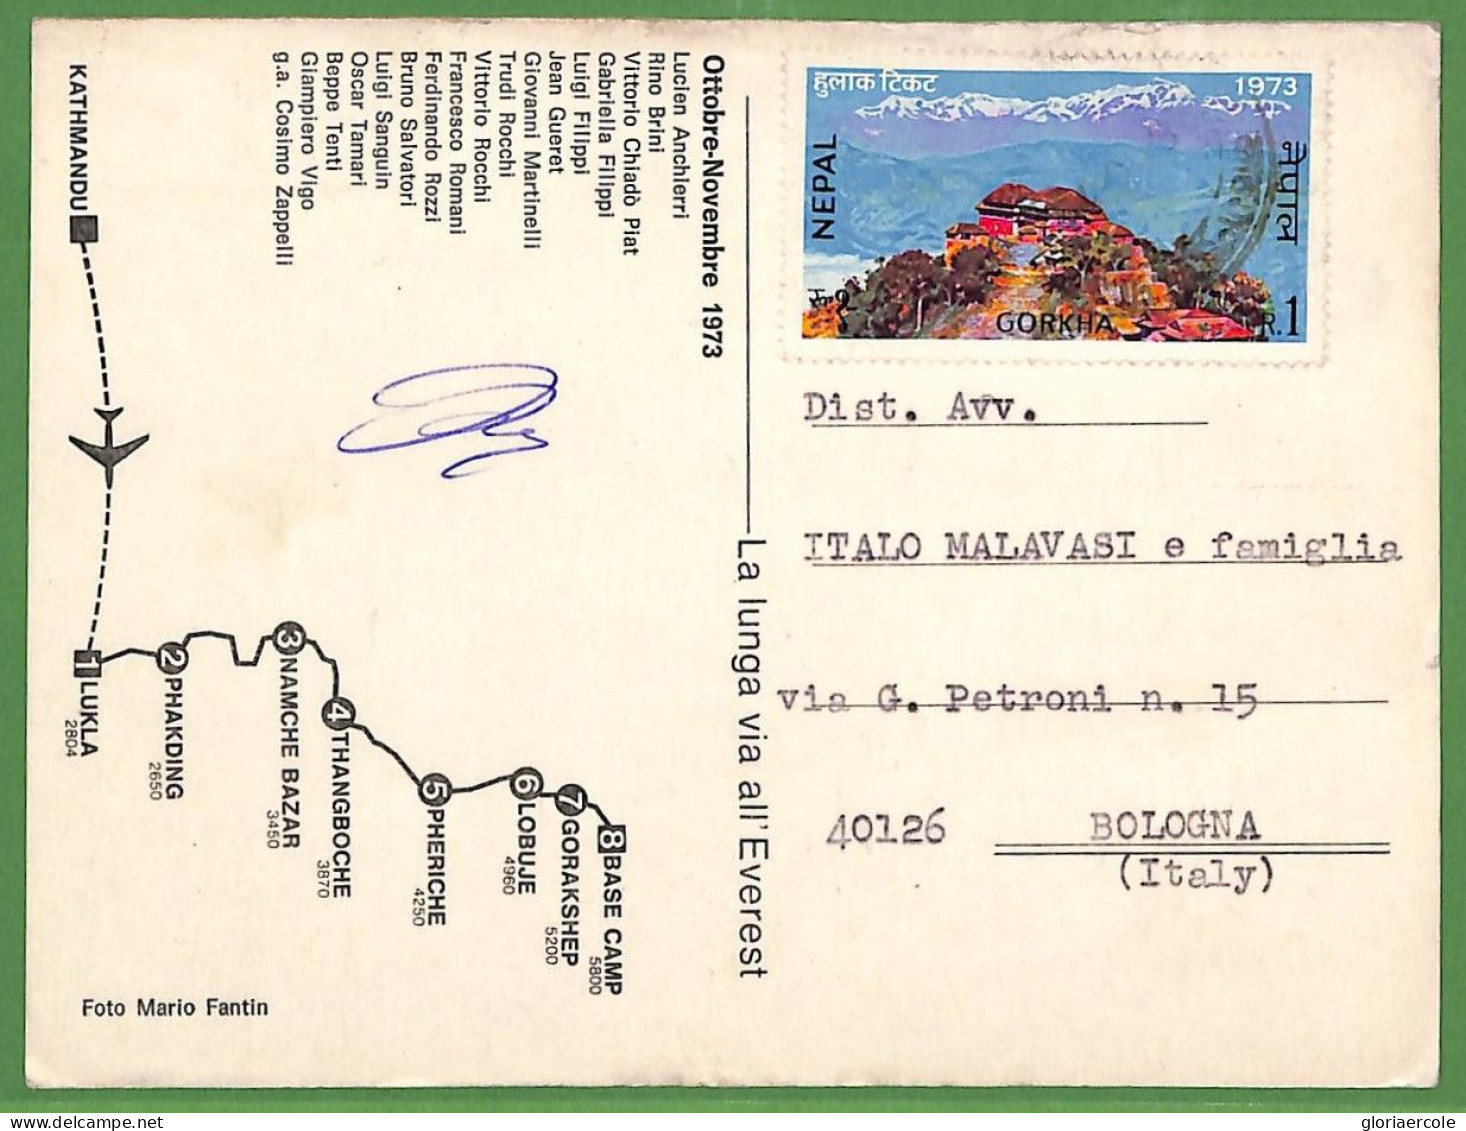 Ae3398 - NEPAL  - POSTAL HISTORY - Mountaineering EXPEDITION To EVEREST  1973 - Escalada